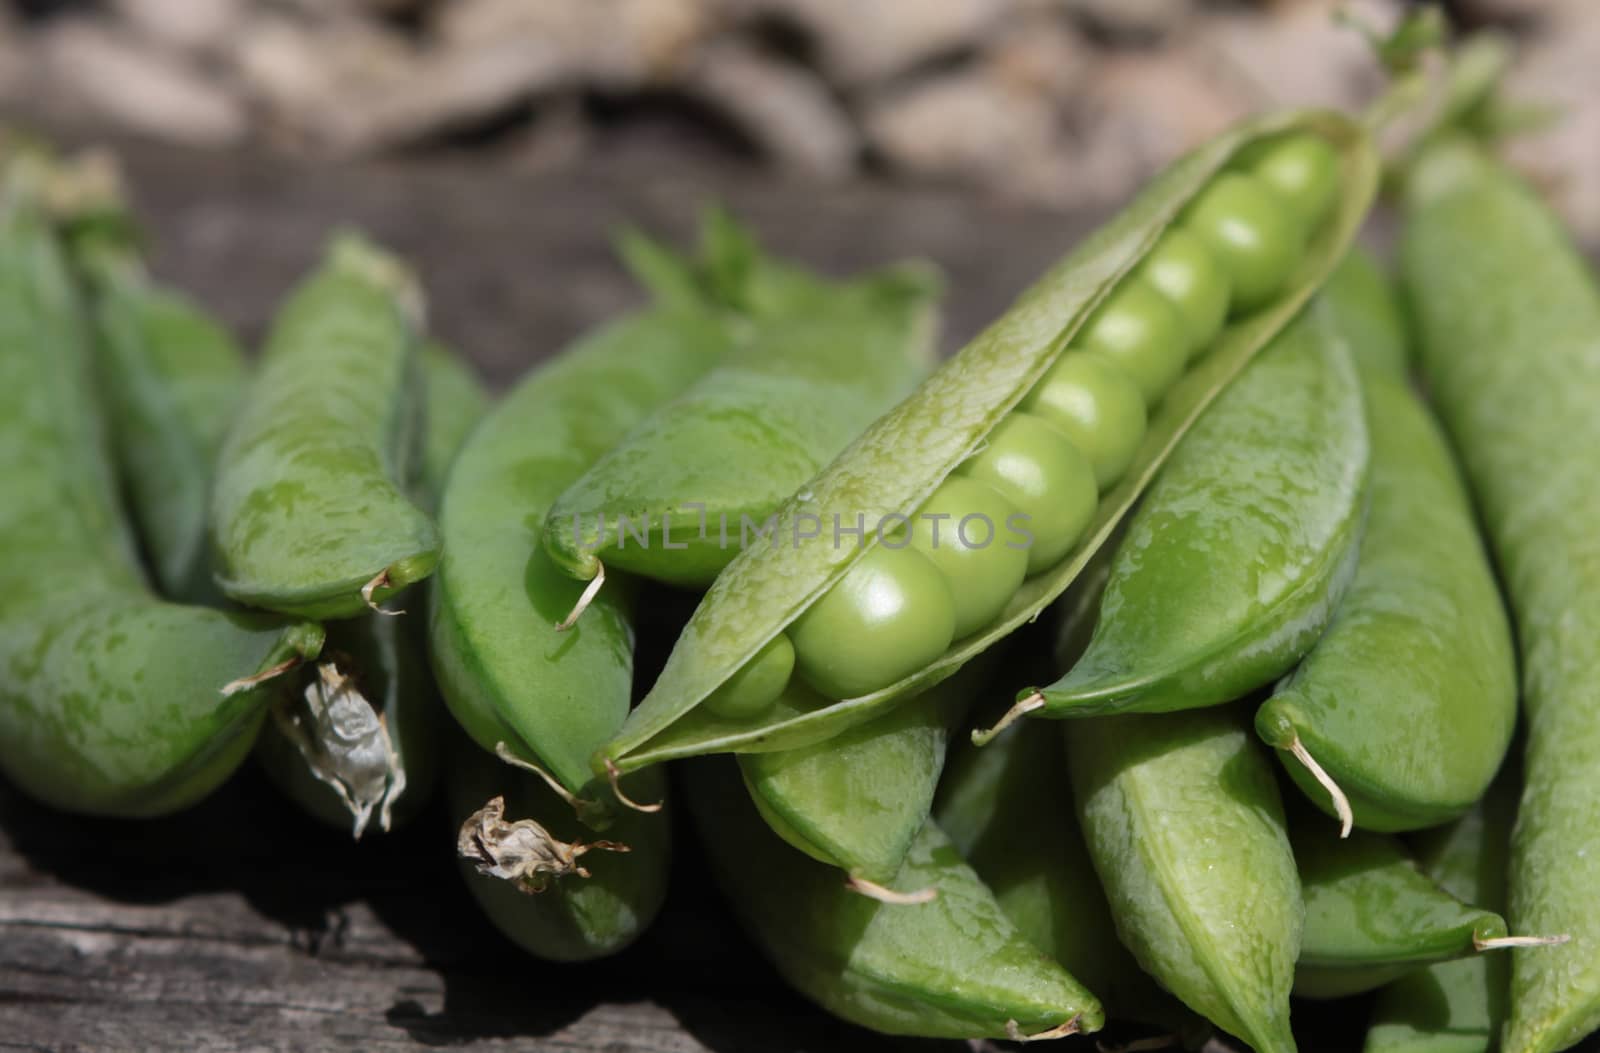 Detail of a crop of freshly picked organically grown peas. One pod is open showing the fresh peas inside its pod. Set on a landscape format.